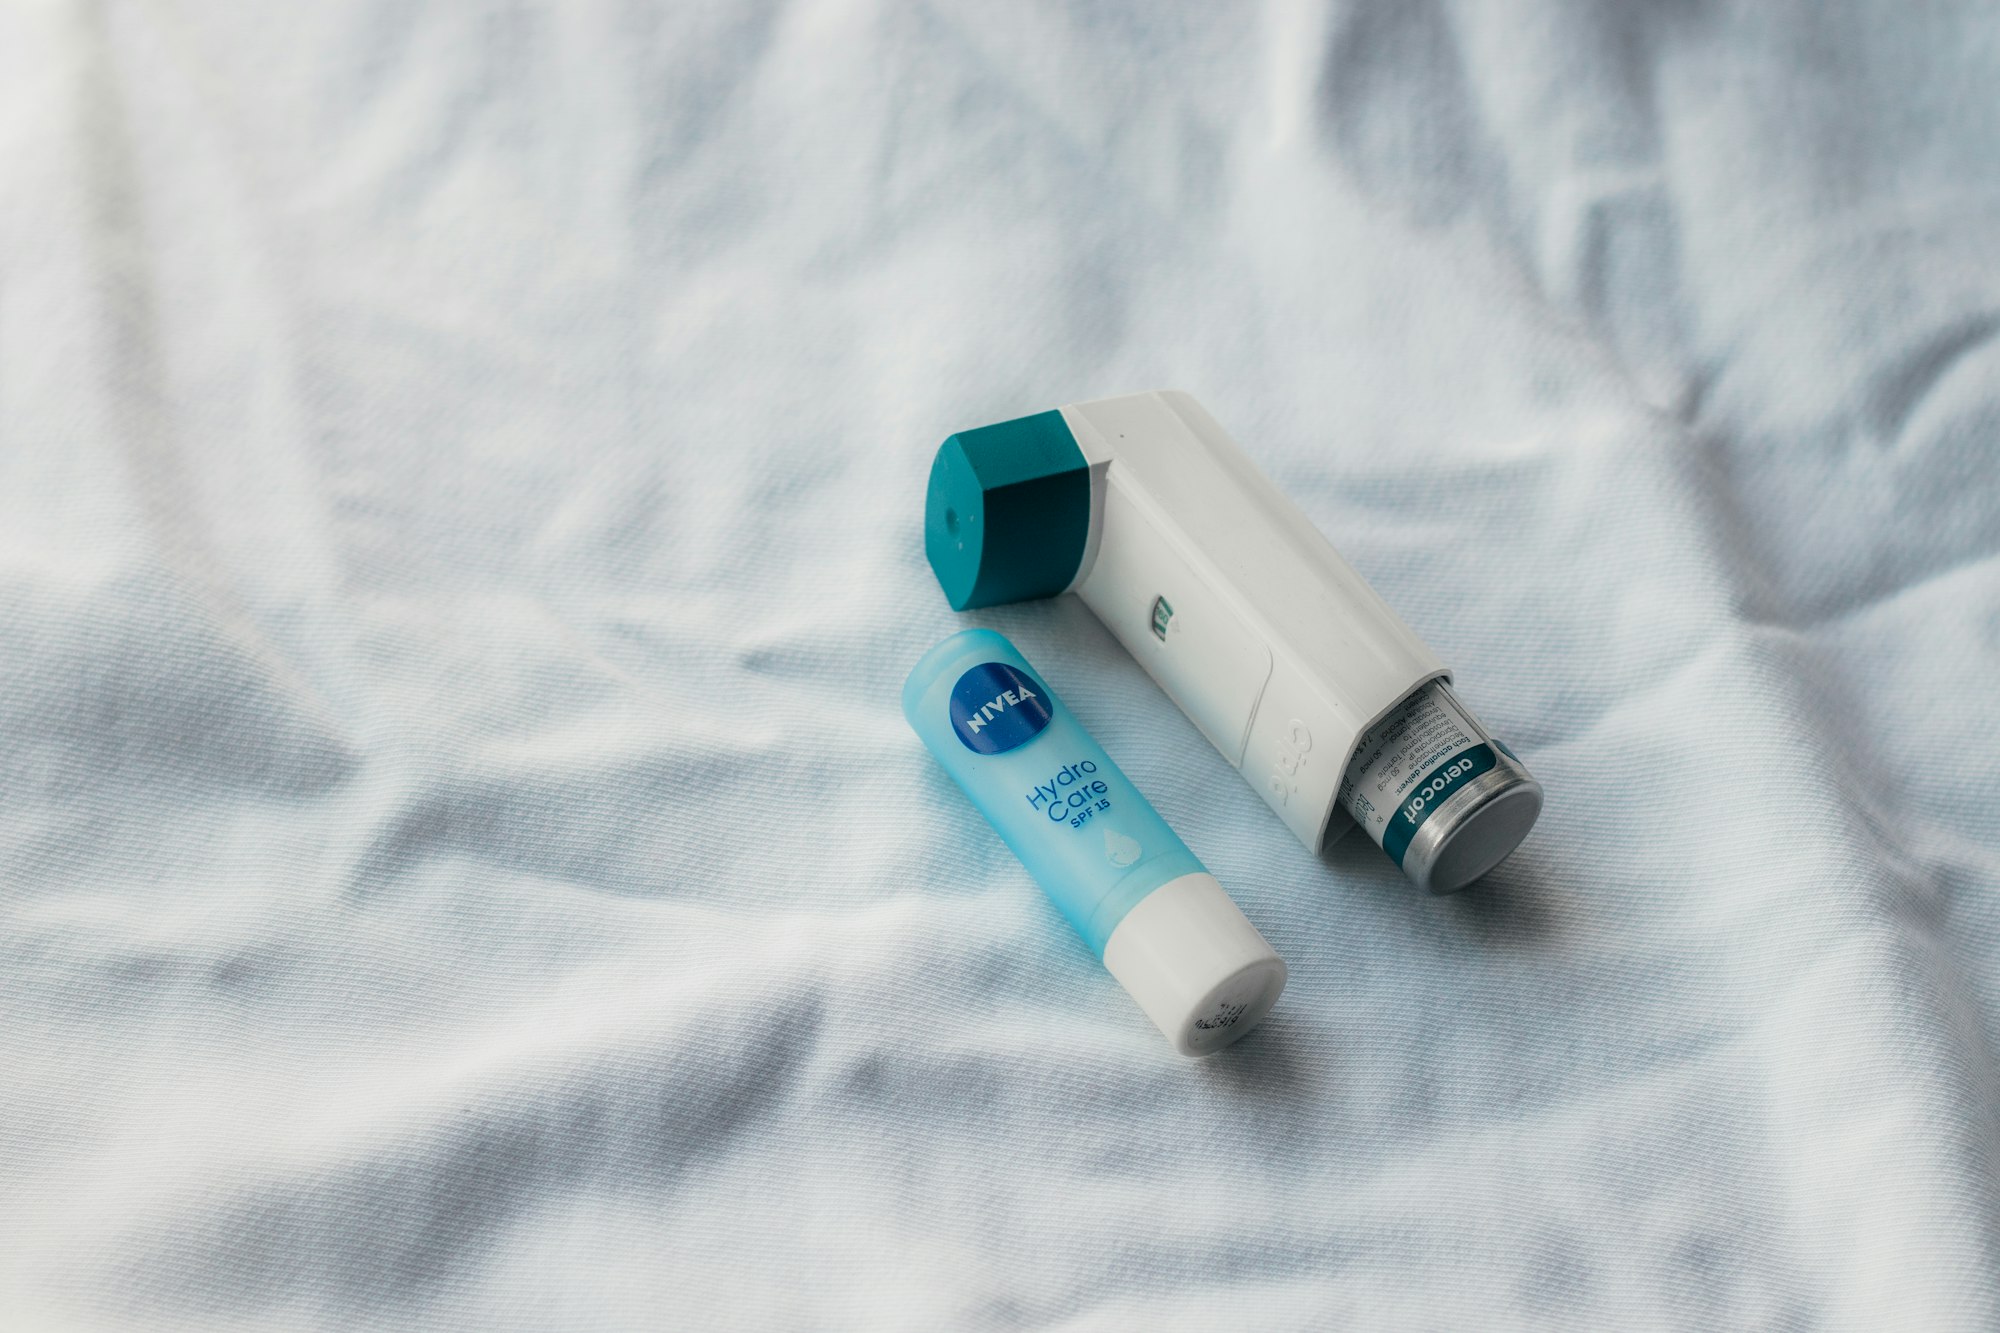 How to Use a Metered Dose Inhaler: Medication Safety Training